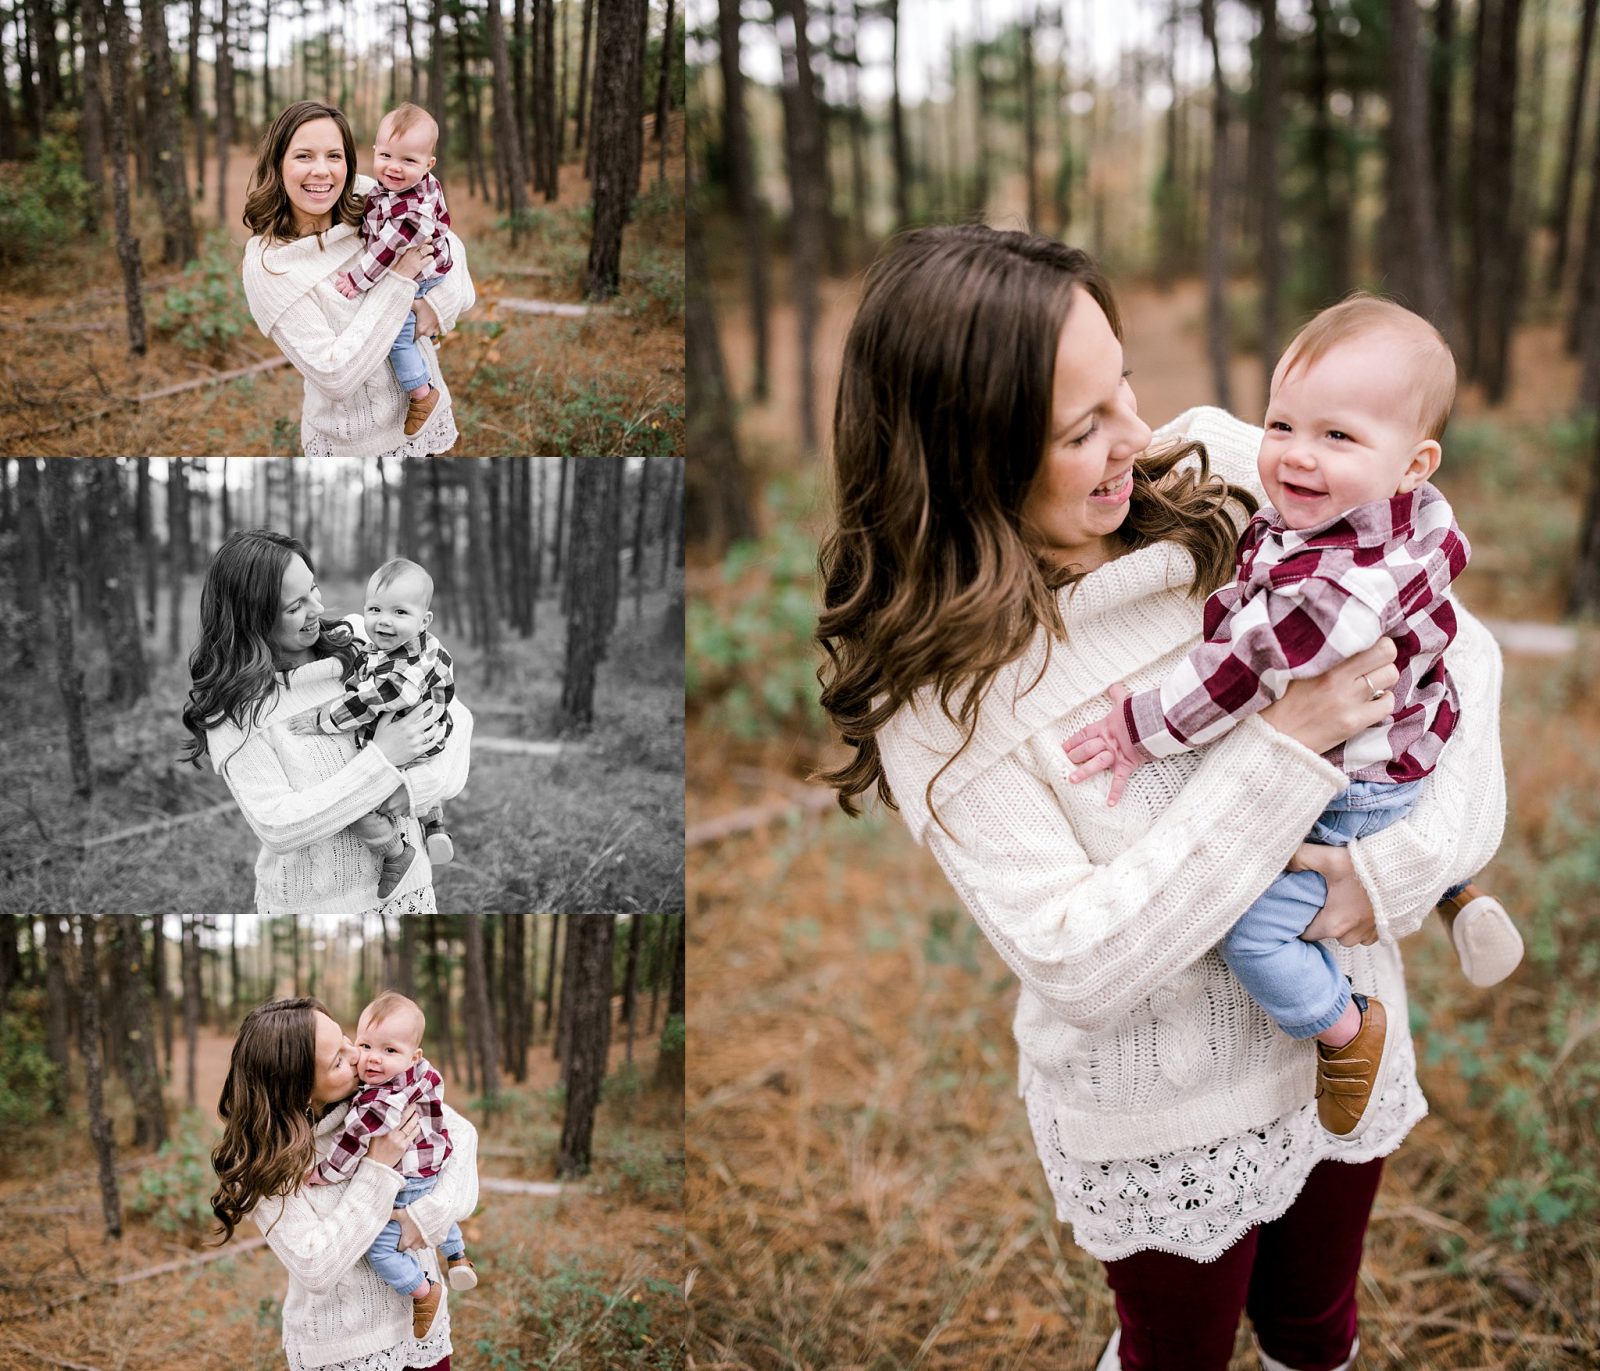 The Harrelson Family | A Grasslands Winter Family Session | Decatur, TX